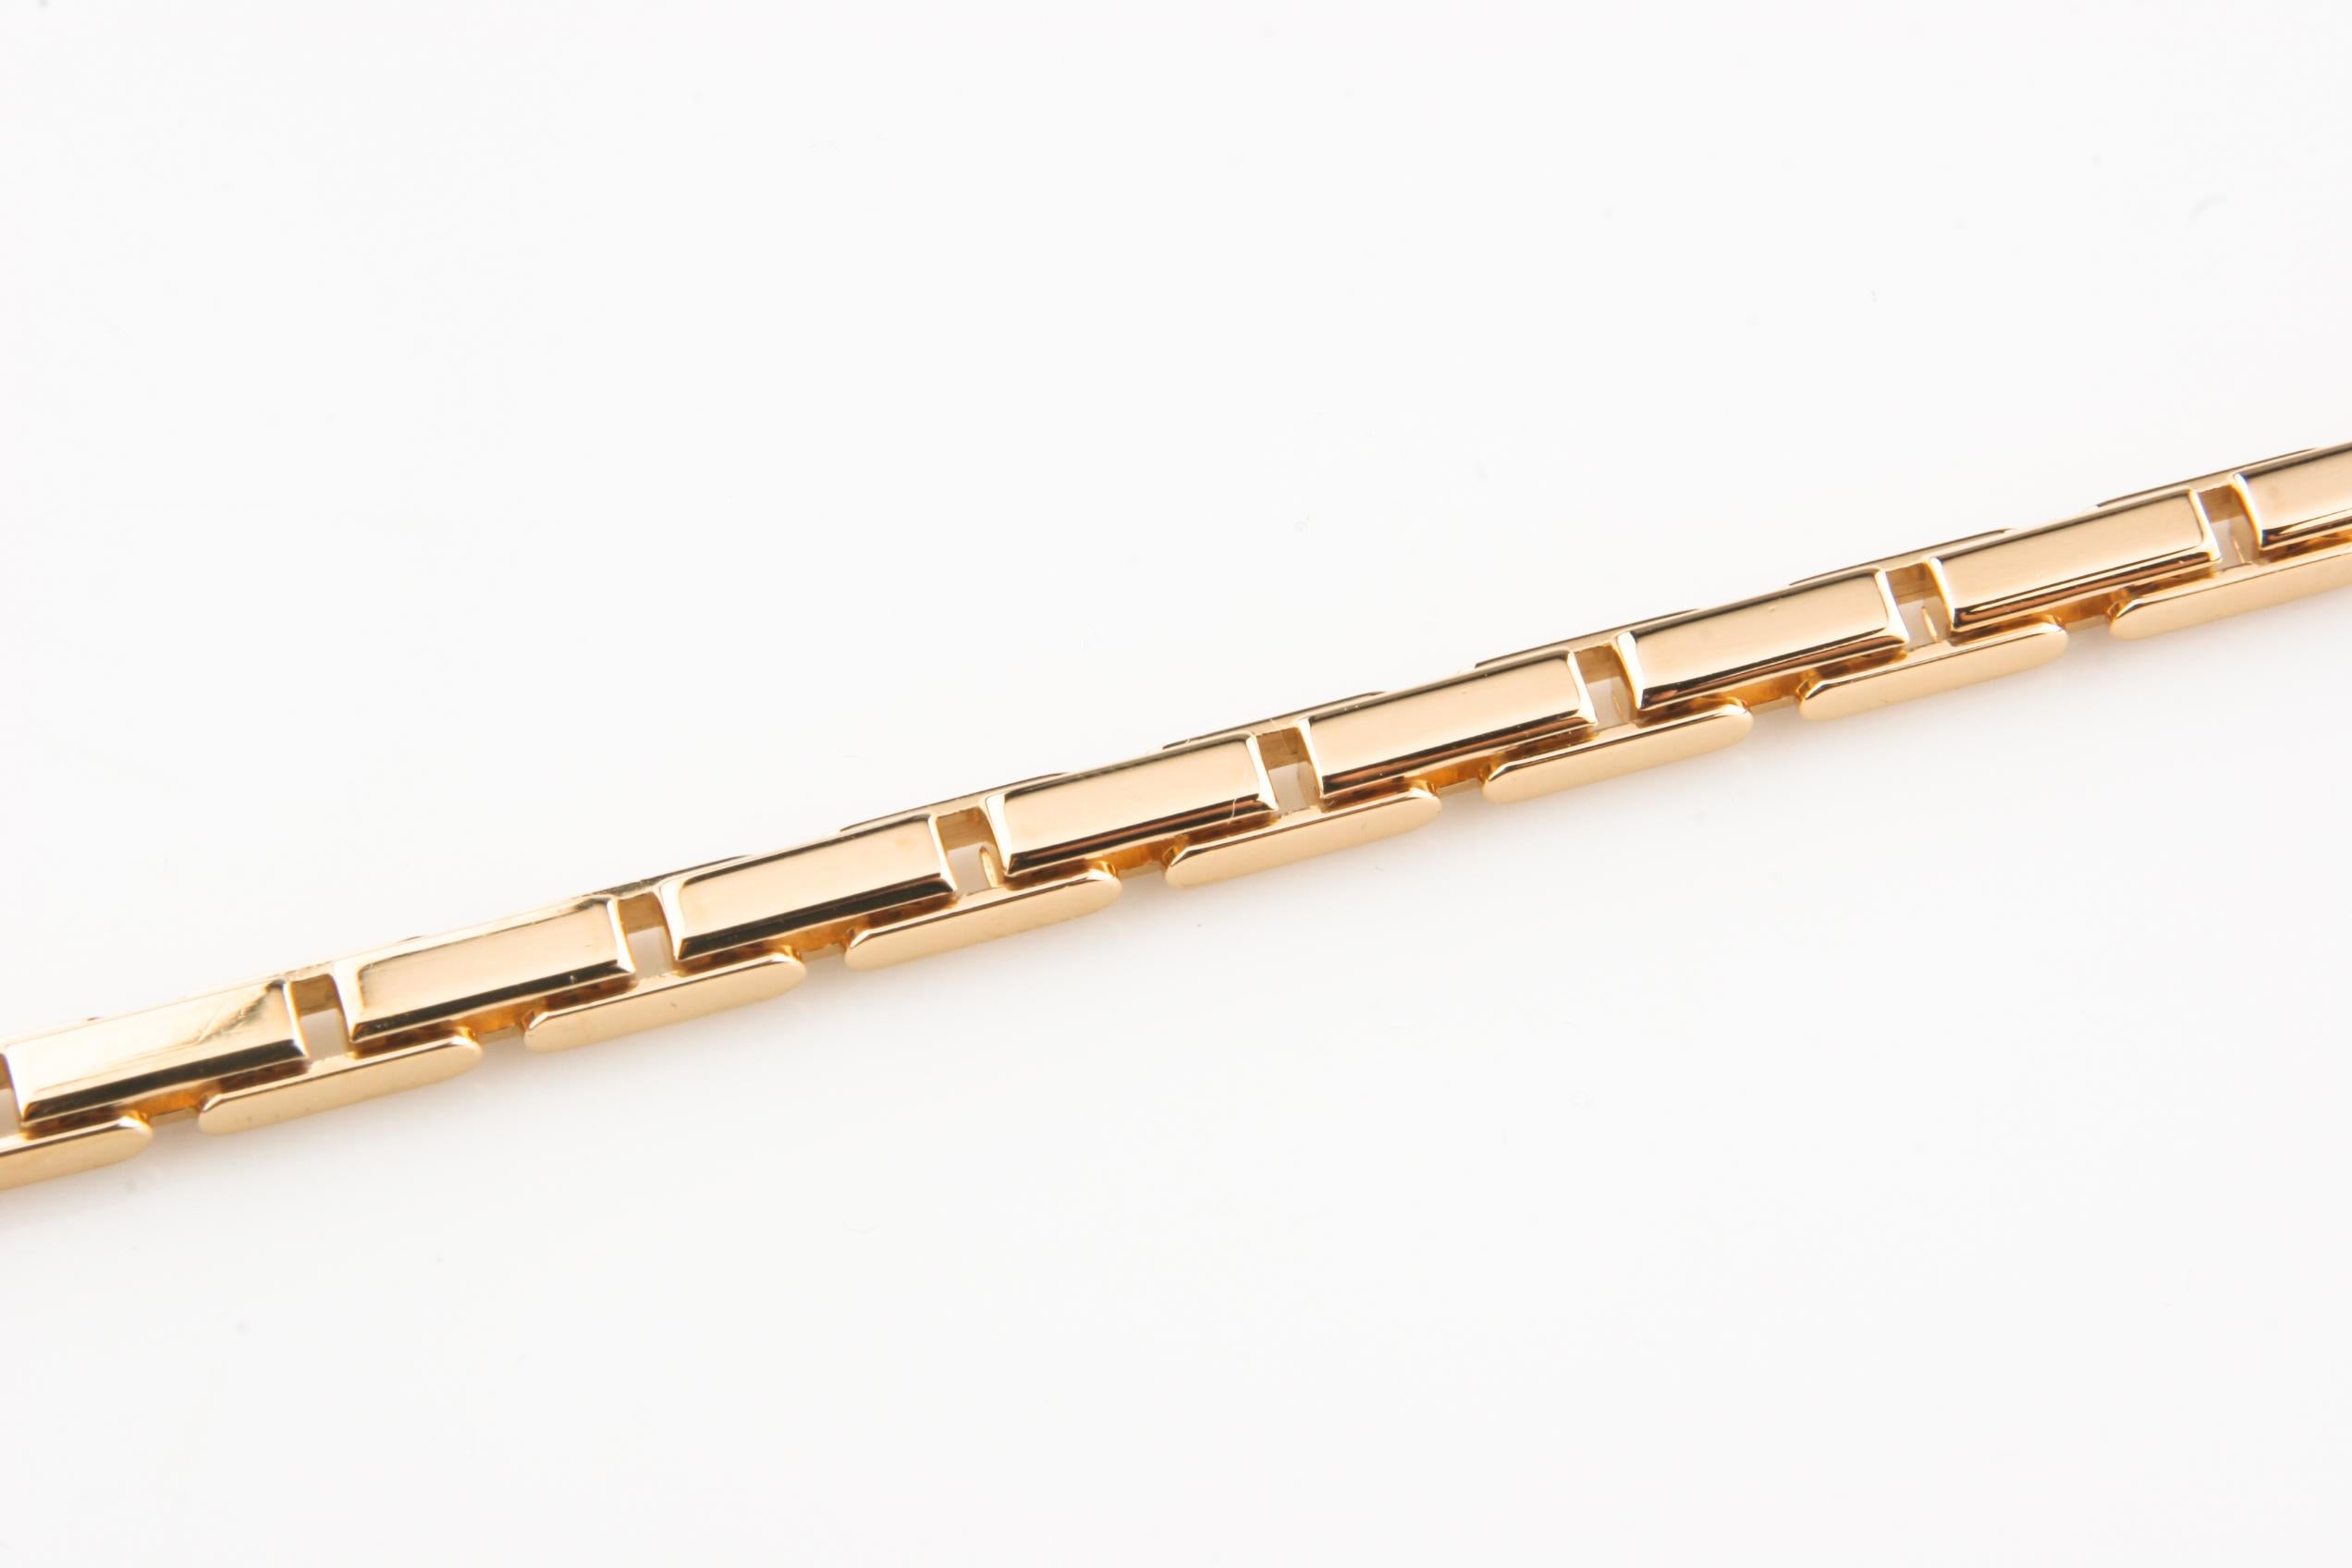 Gorgeous Cartier Agrafe 18k Yellow Gold Bracelet
Features Trademark Agrafe Hook-and-Eye Clasp
Total Mass = 33.3 grams
Length = 7.25